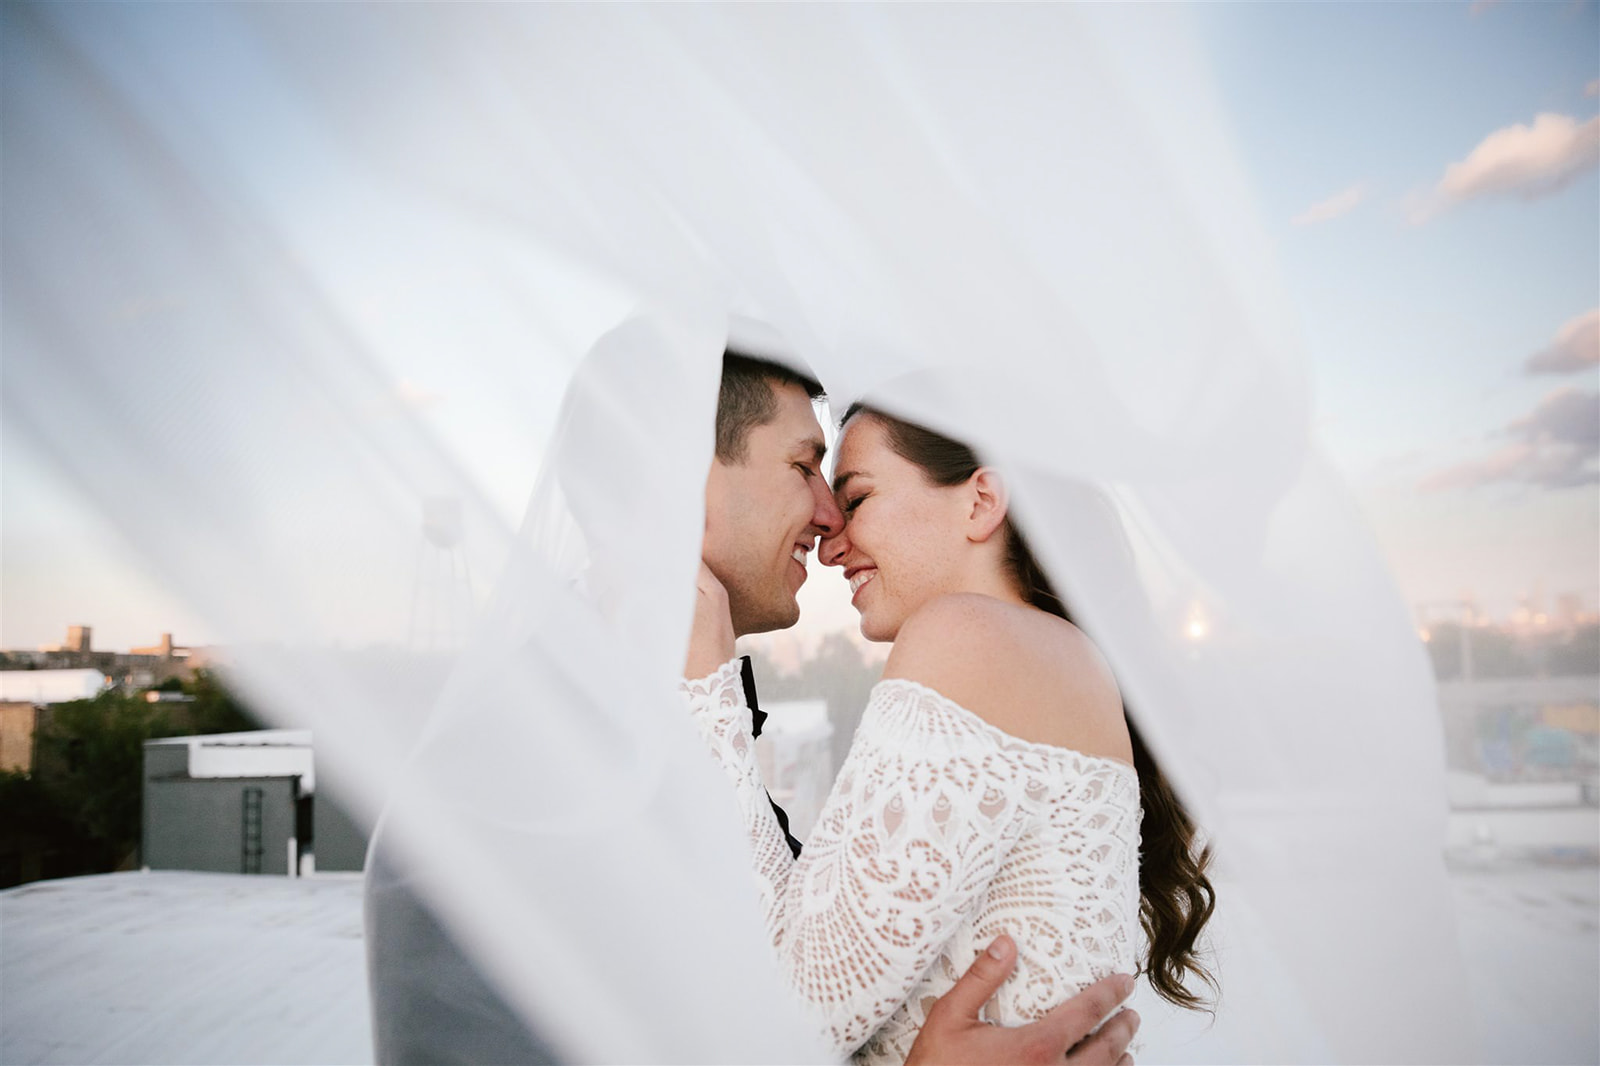 Bride's veil dances in the sunset breeze as she embraces her groom on Walden Chicago rooftop.